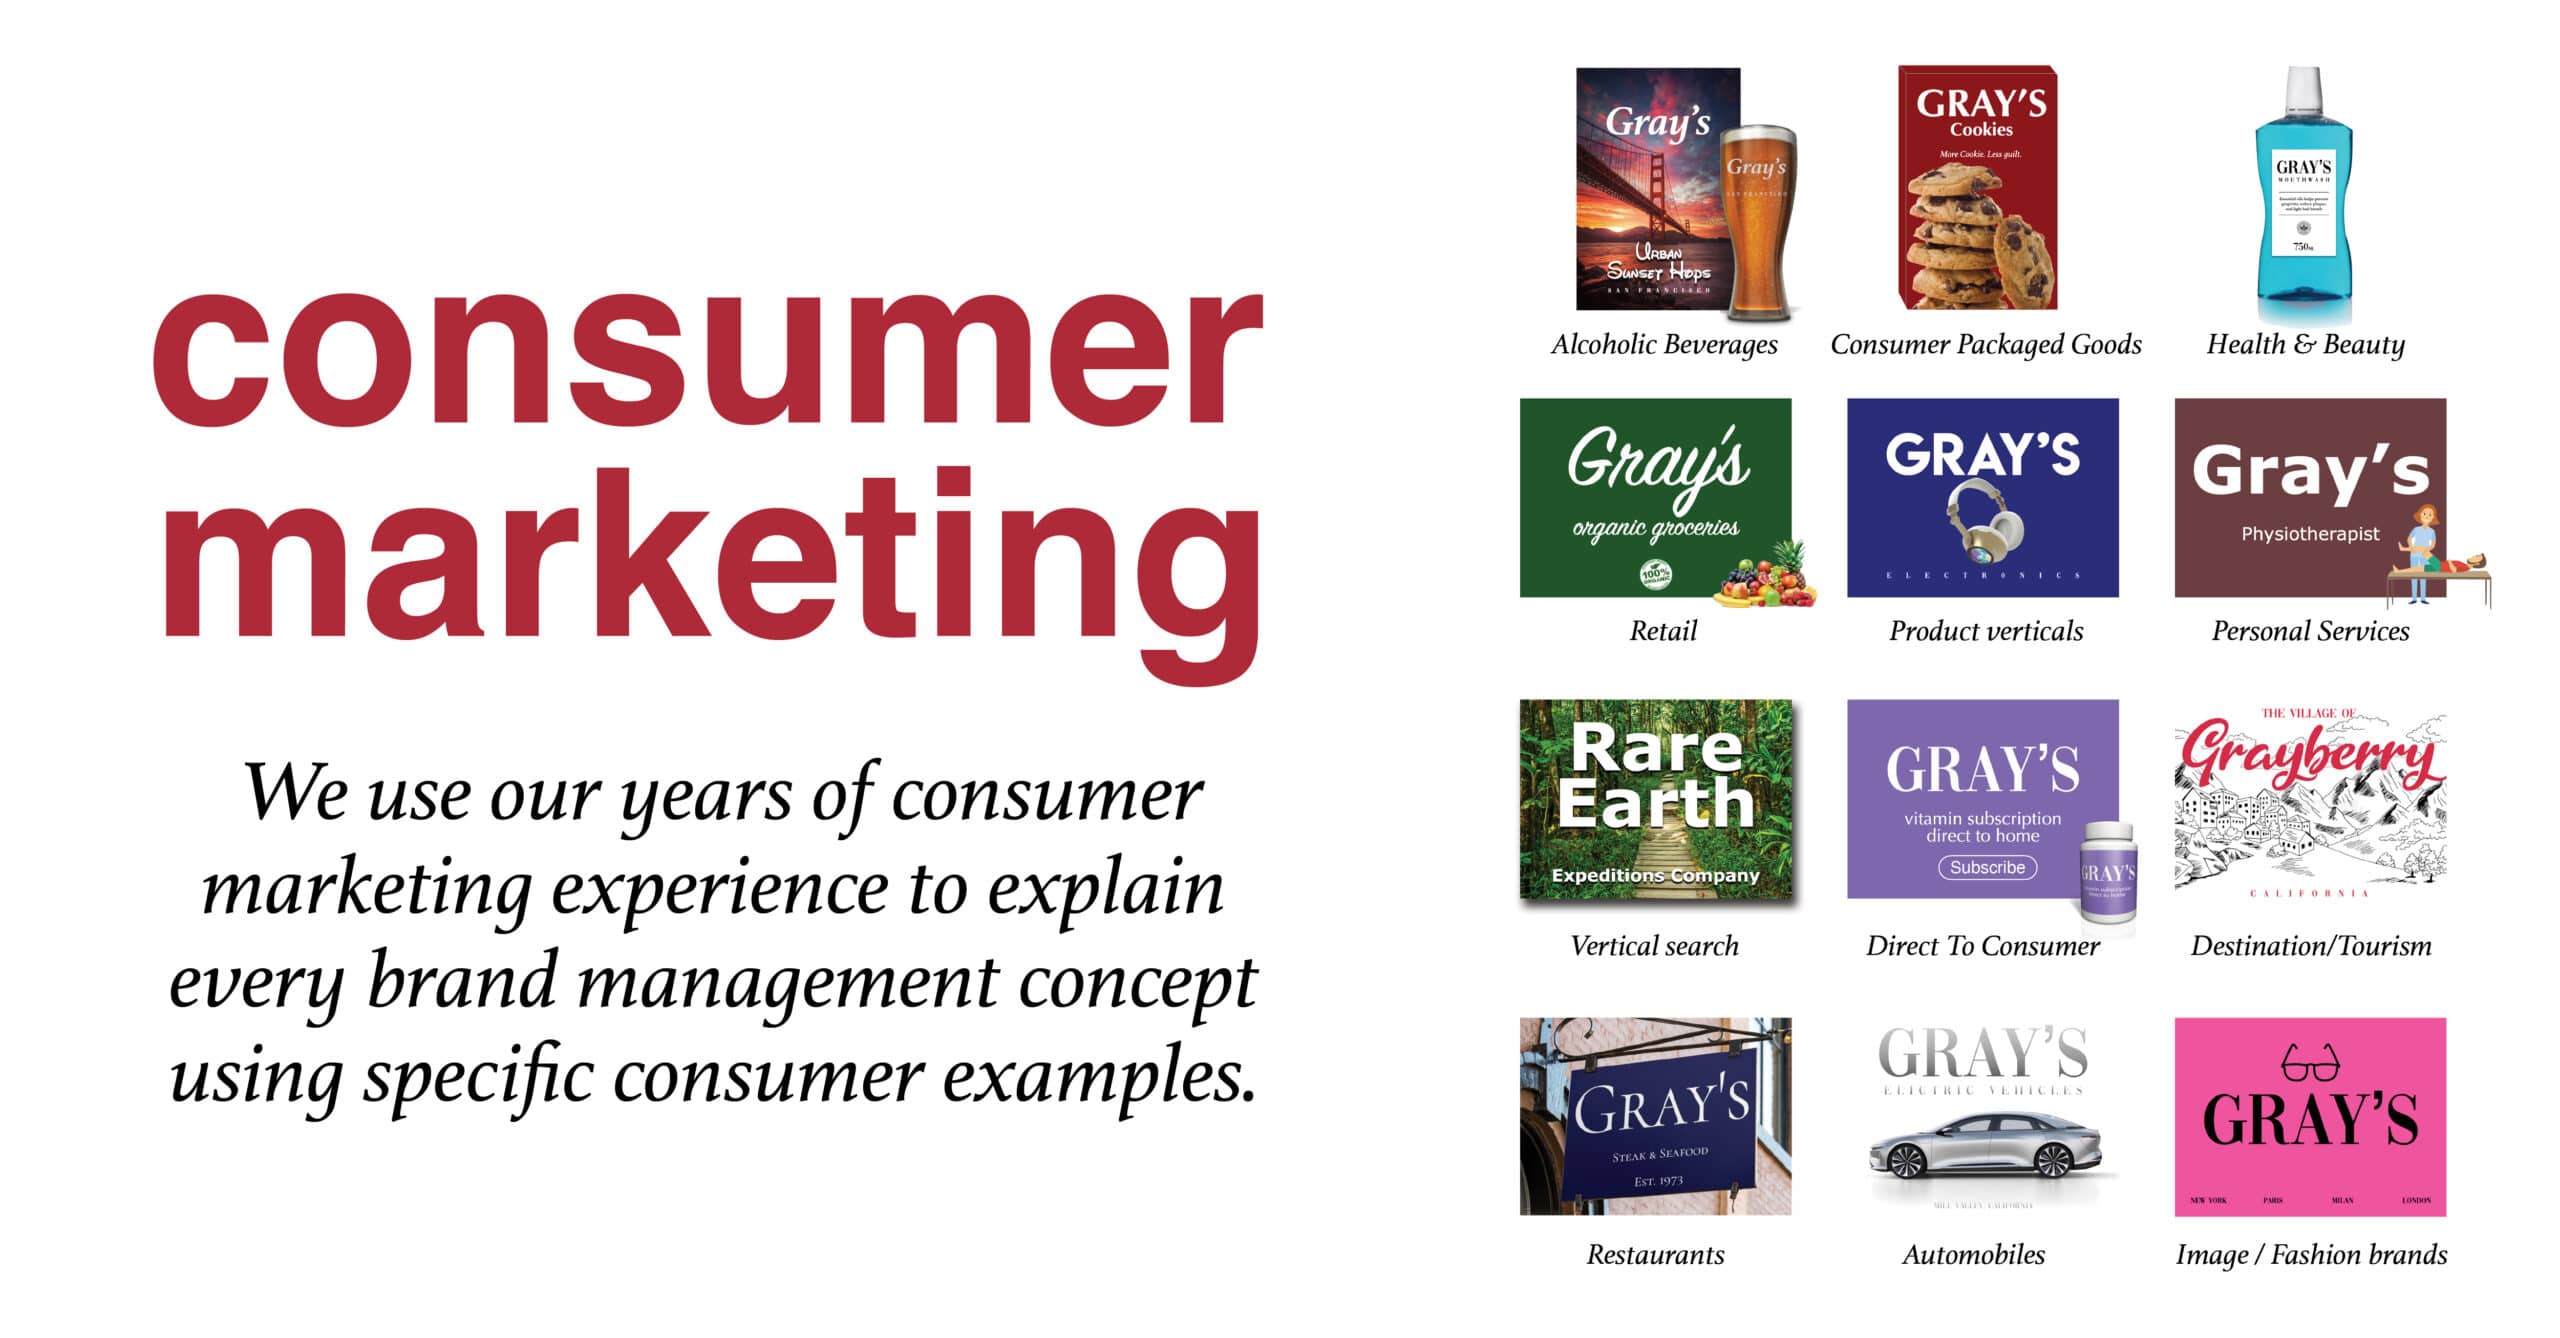 Should marketing for consumer goods companies